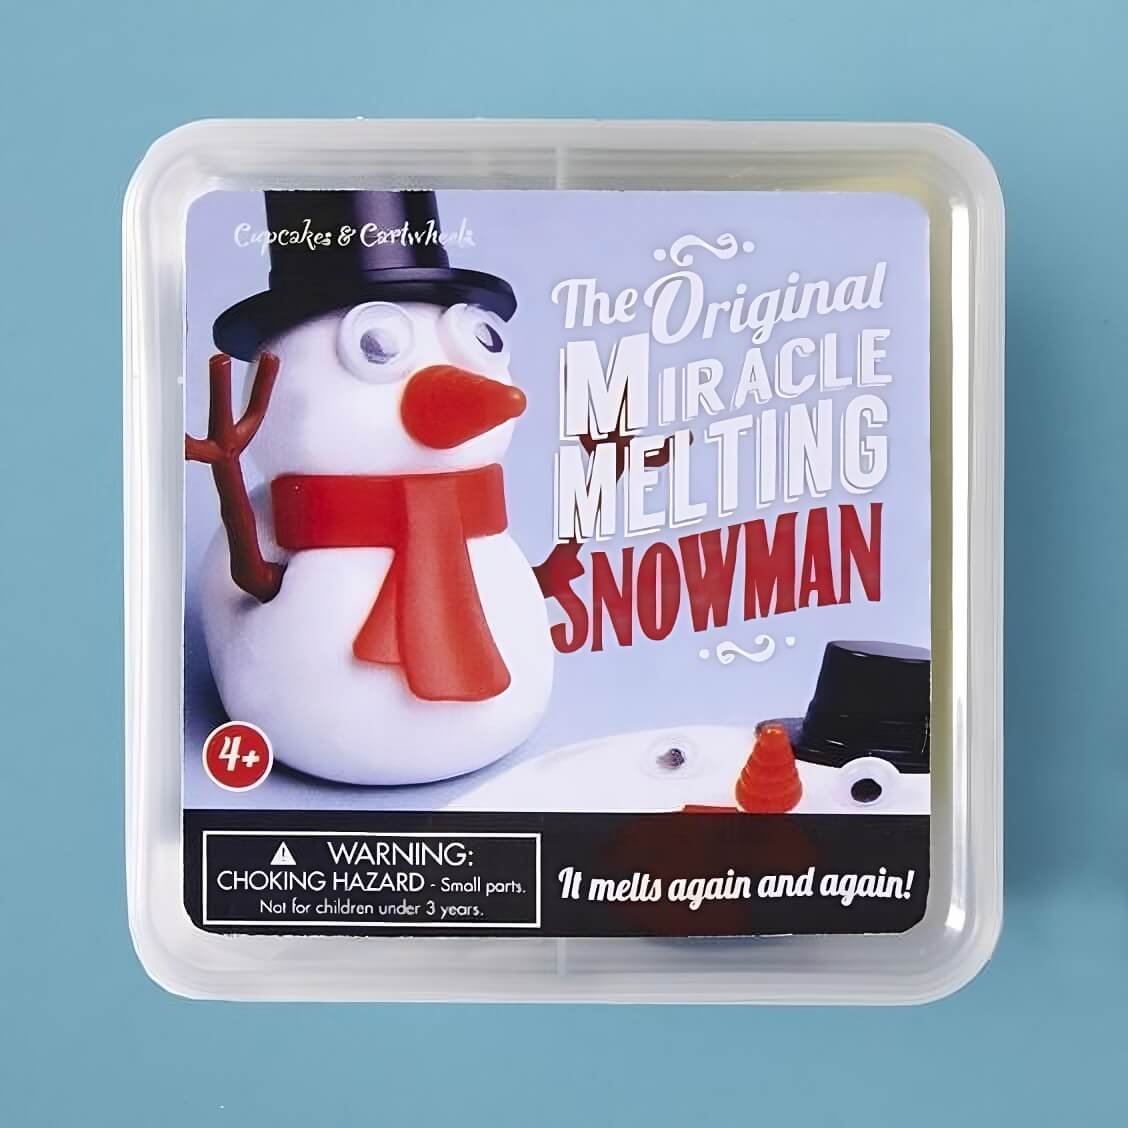 Melted Snowman Kit